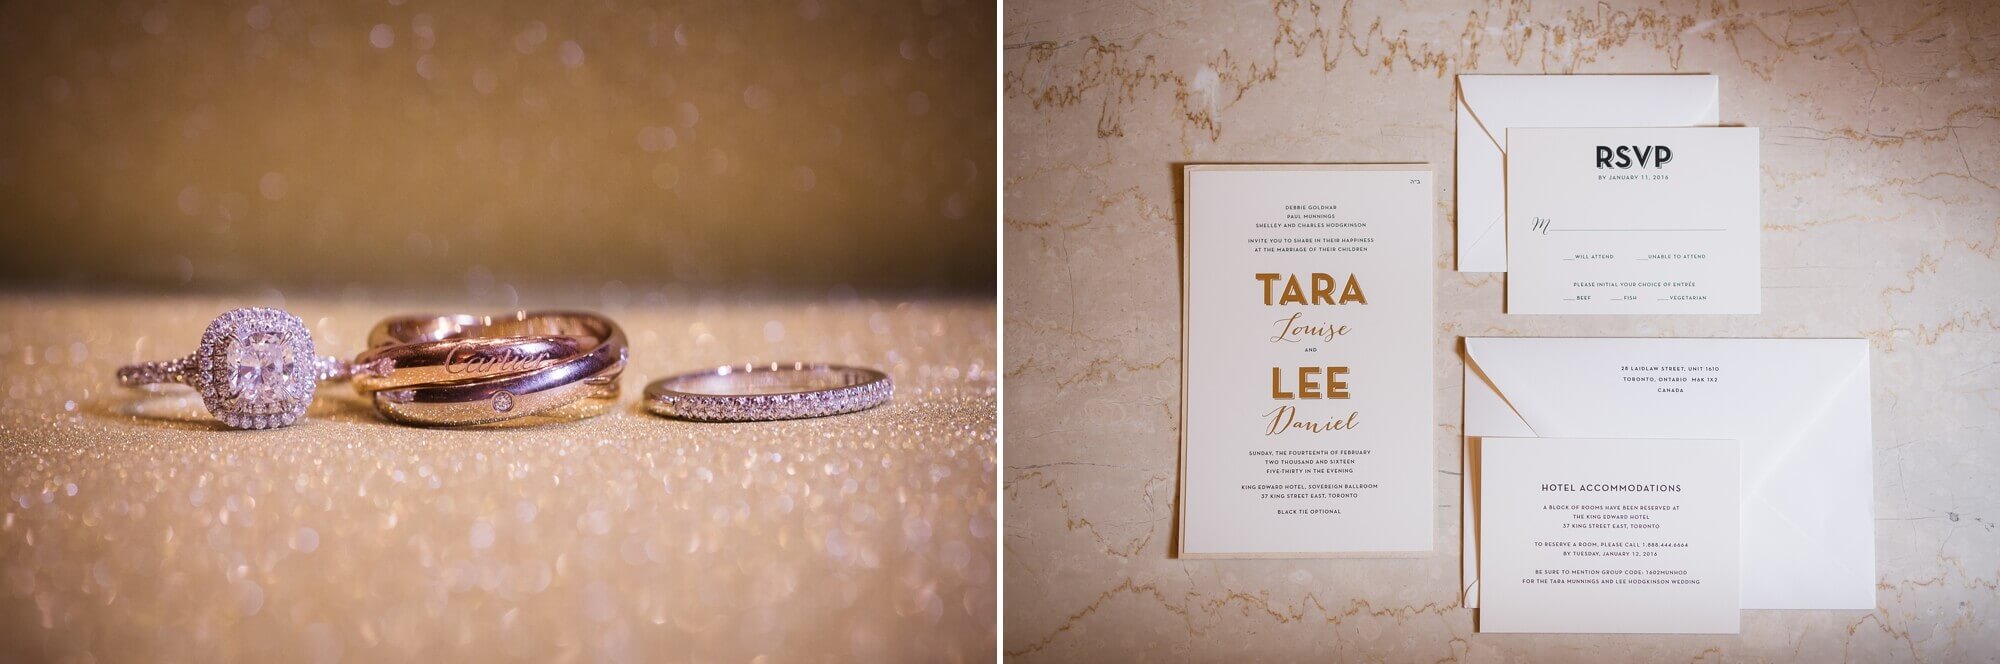 Detailed shot of the wedding rings, engagement ring and wedding invitations